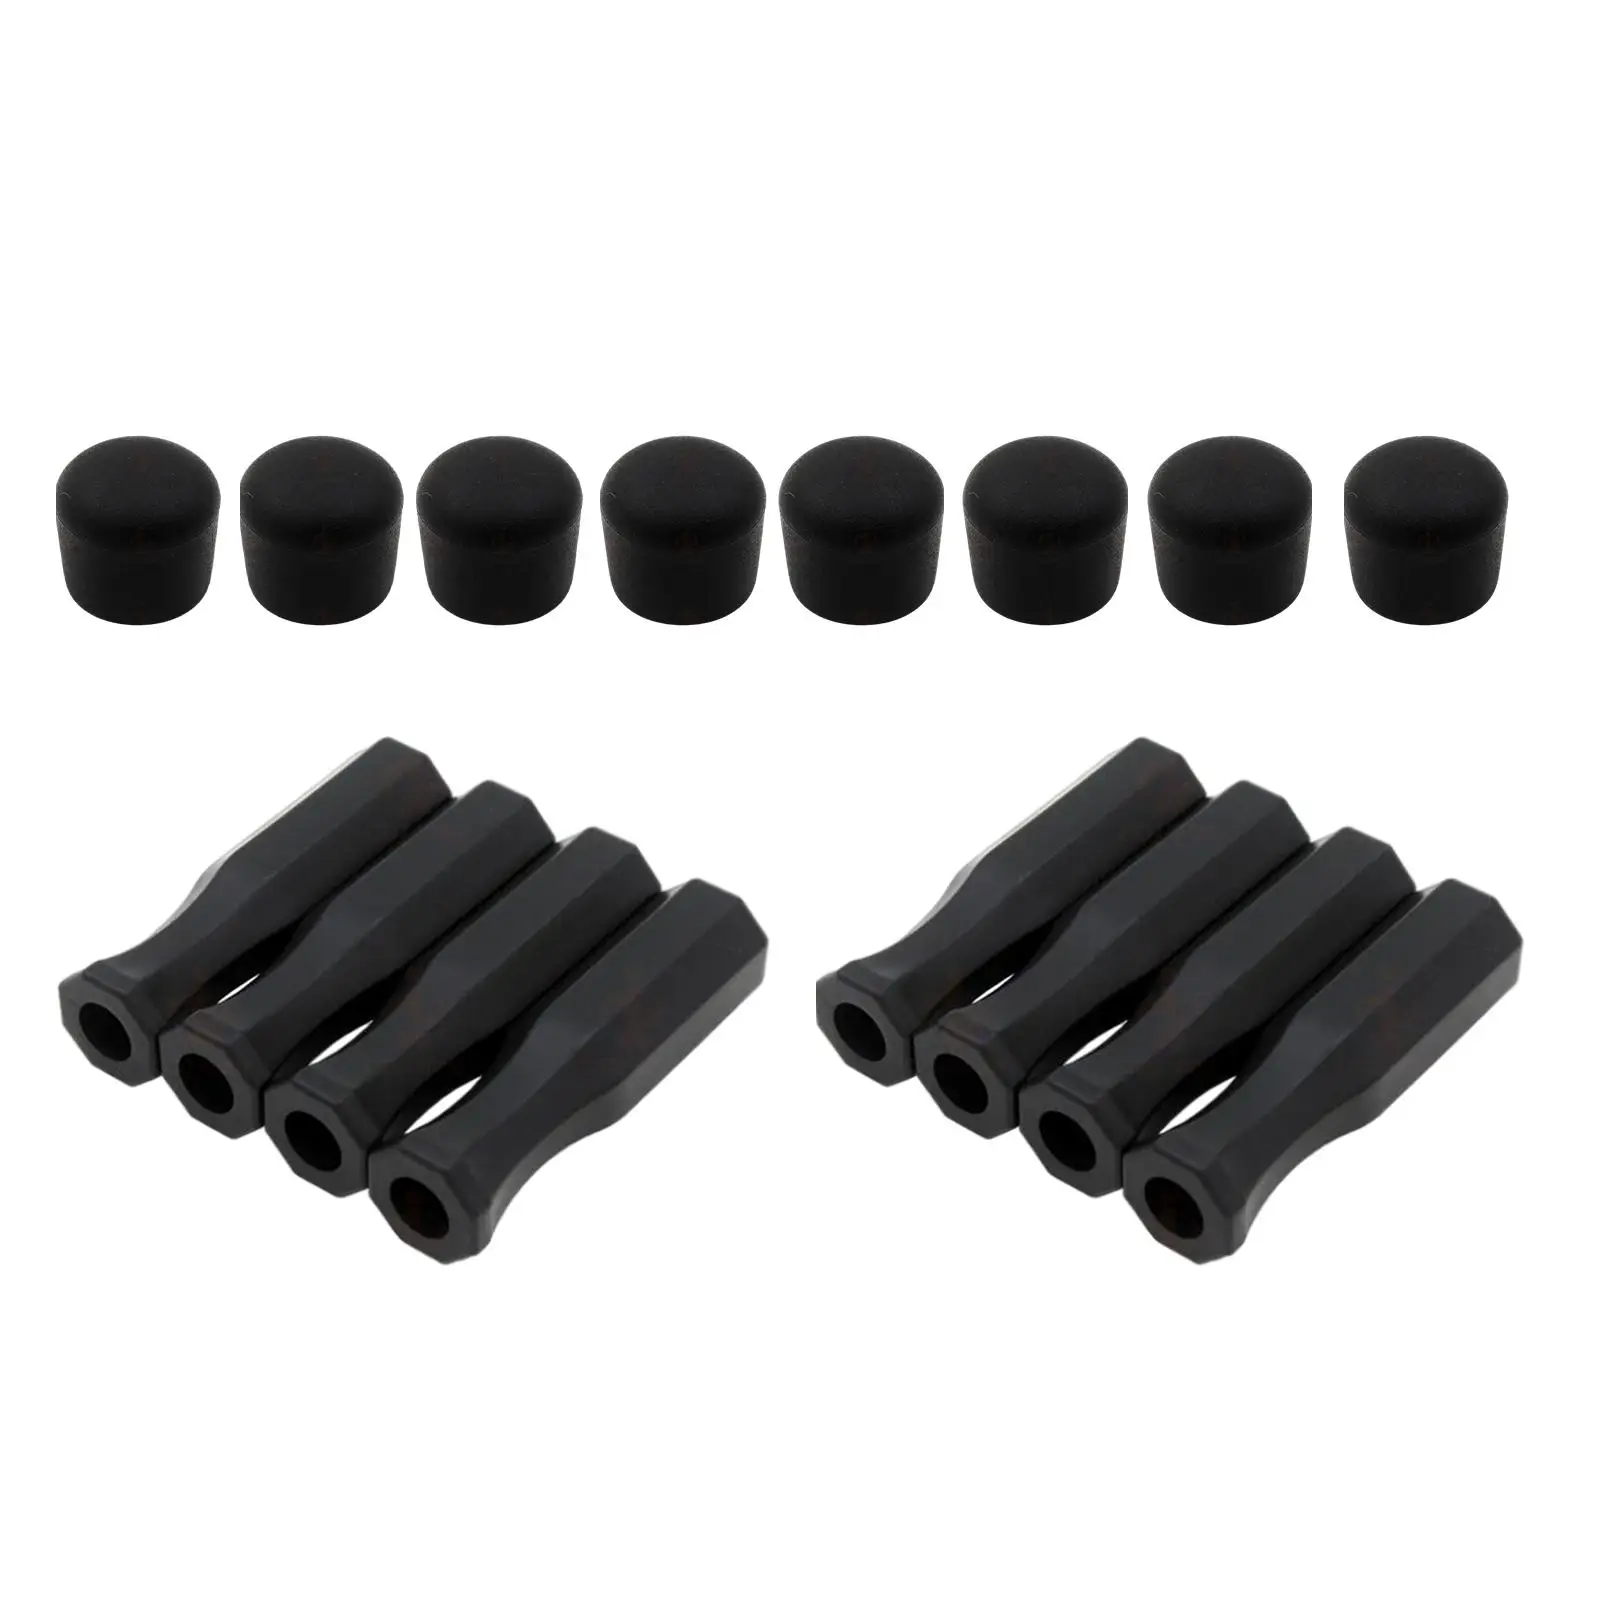 16Pack Premium Octagonal Handles and Safety End Caps Grips Black Accessories for Children